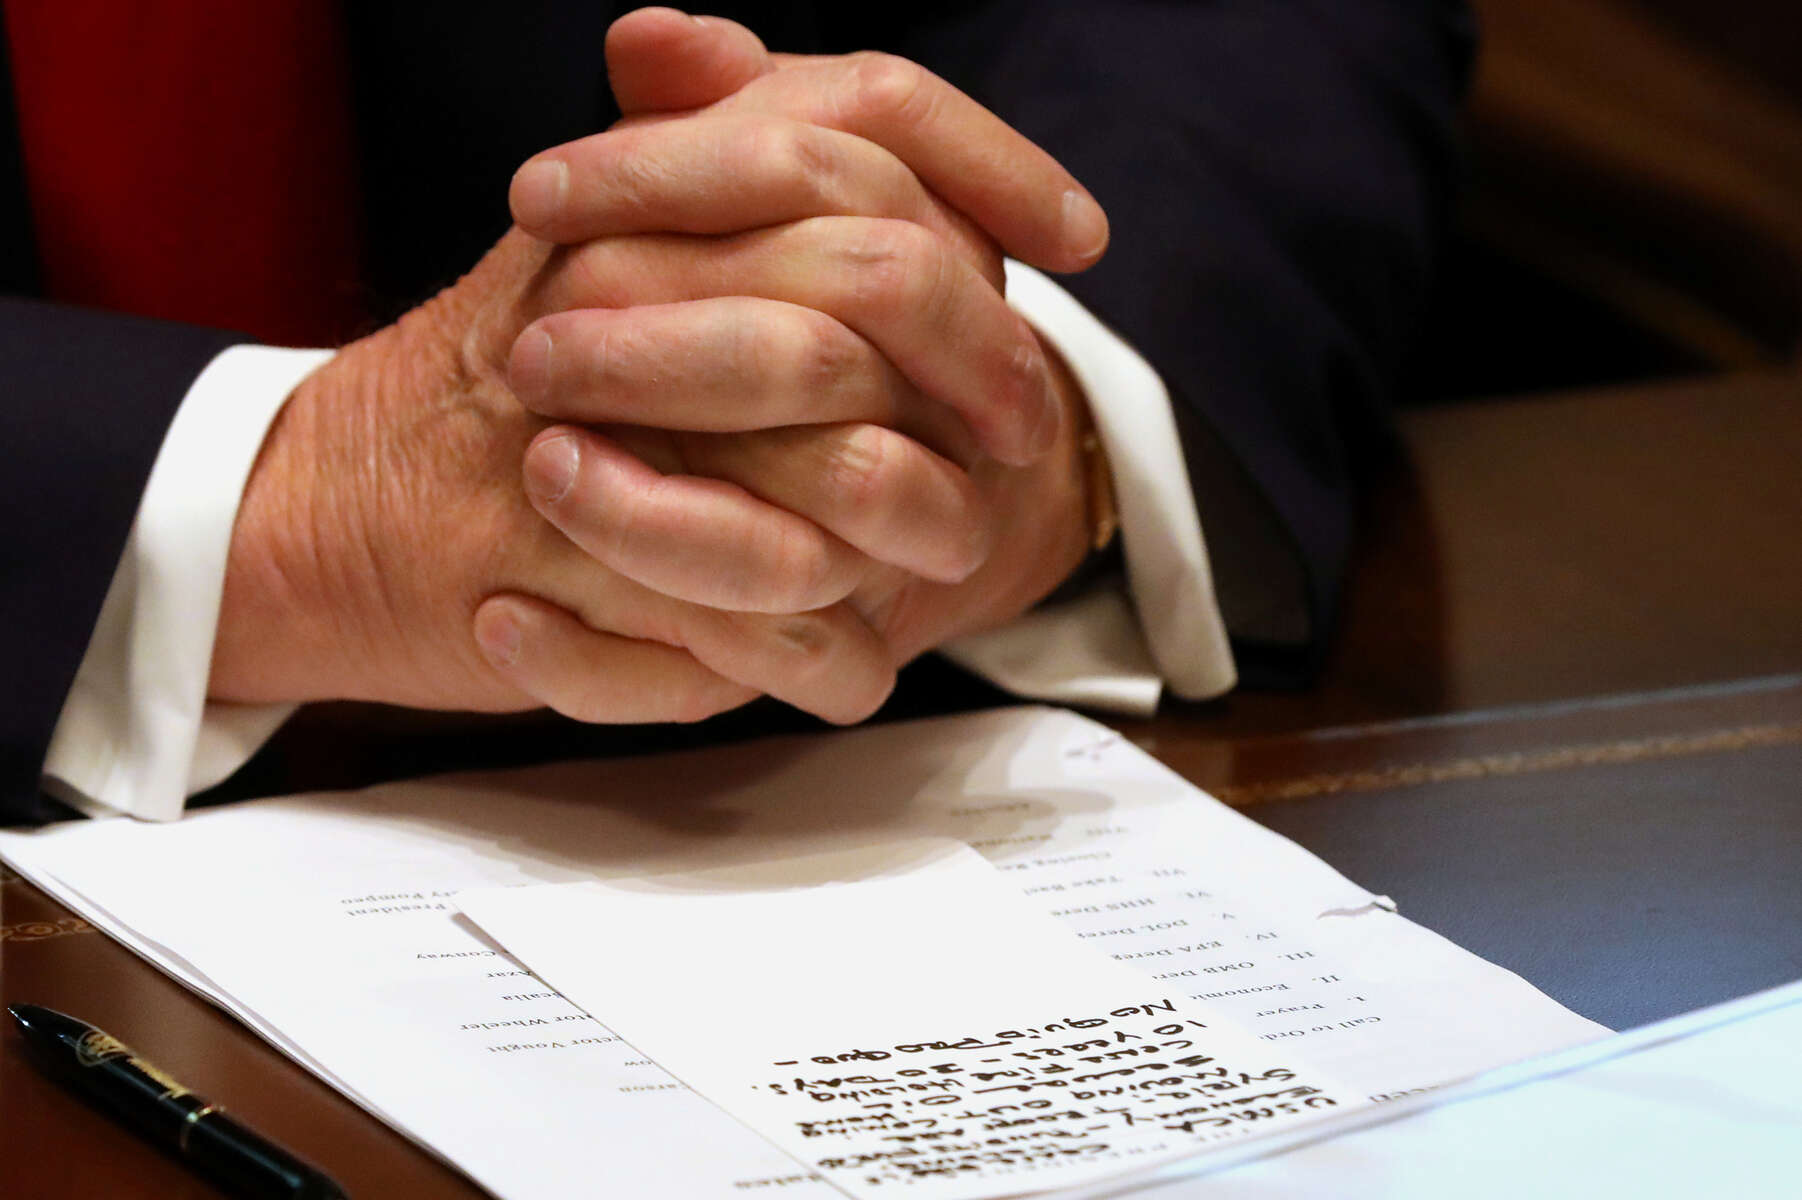 Talking points are visible in front of U.S. President Donald Trump as he speaks during a cabinet meeting at the White House in Washington, U.S., October 21, 2019. Within the notes, {quote}No Quid Pro Quo{quote} is visible. REUTERS/Leah Millis